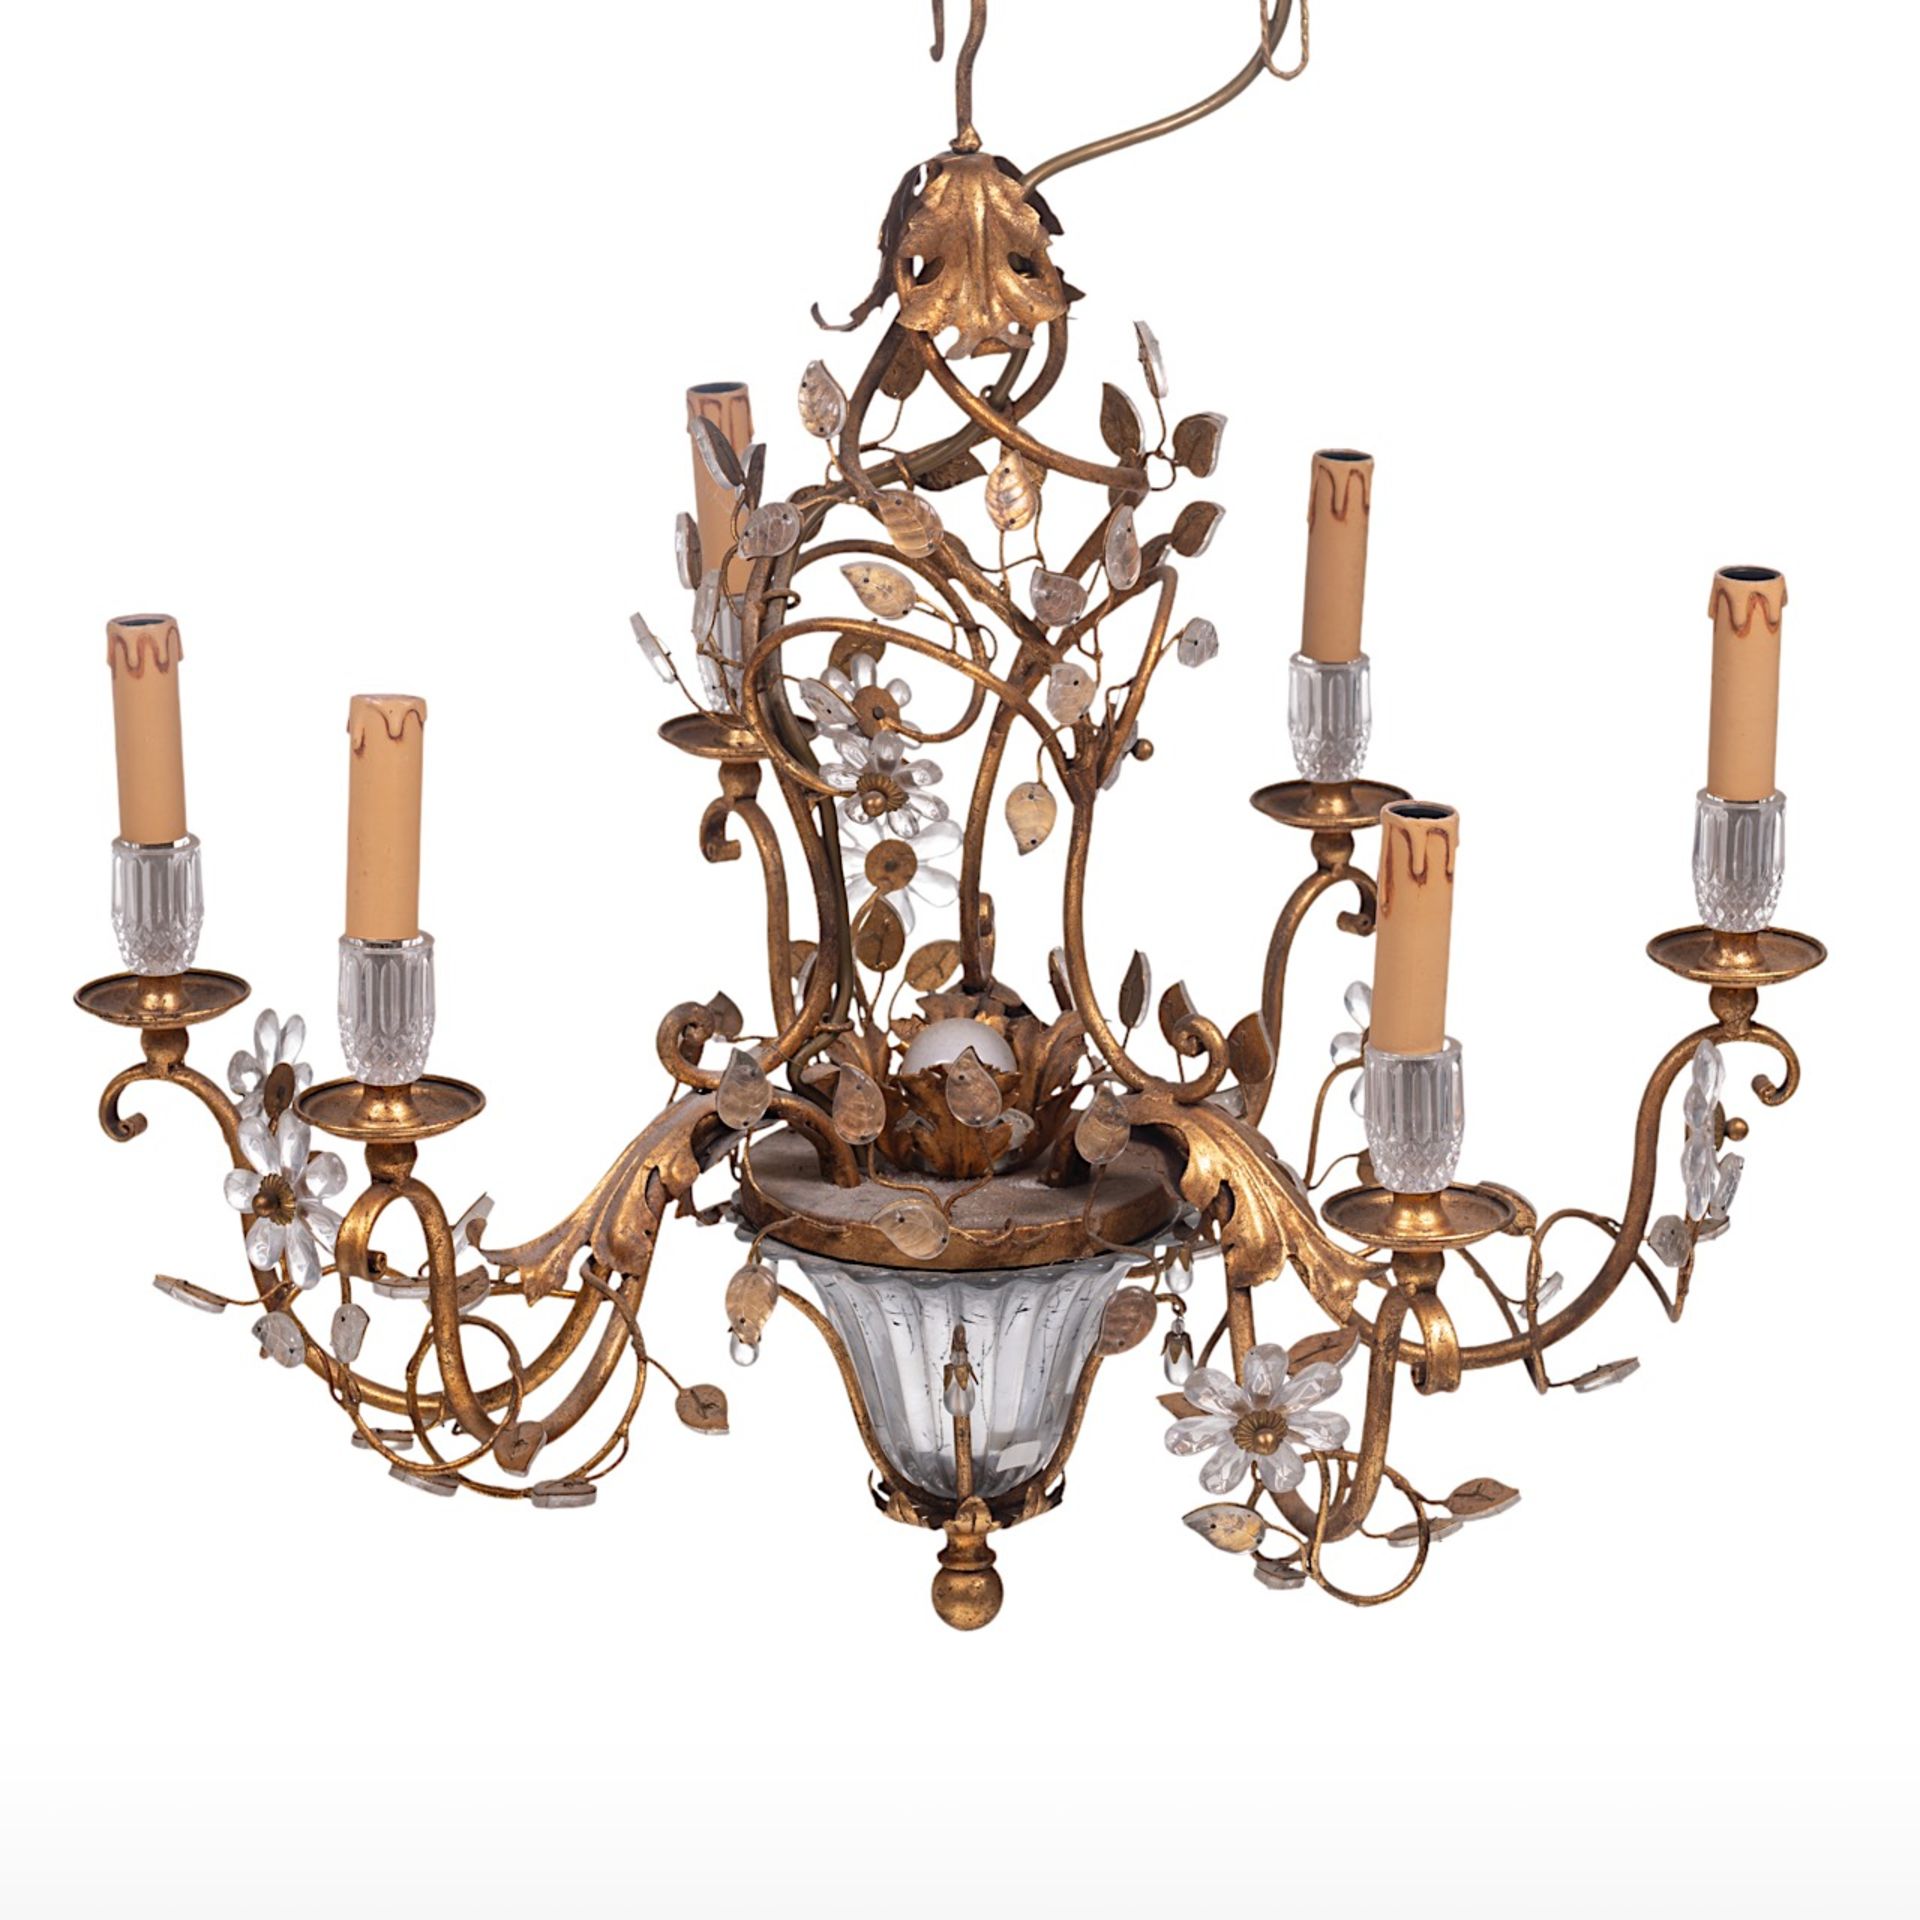 A gilt brass and cut-glass floral decorated chandelier, H 60 - dia 68 cm - Image 3 of 5